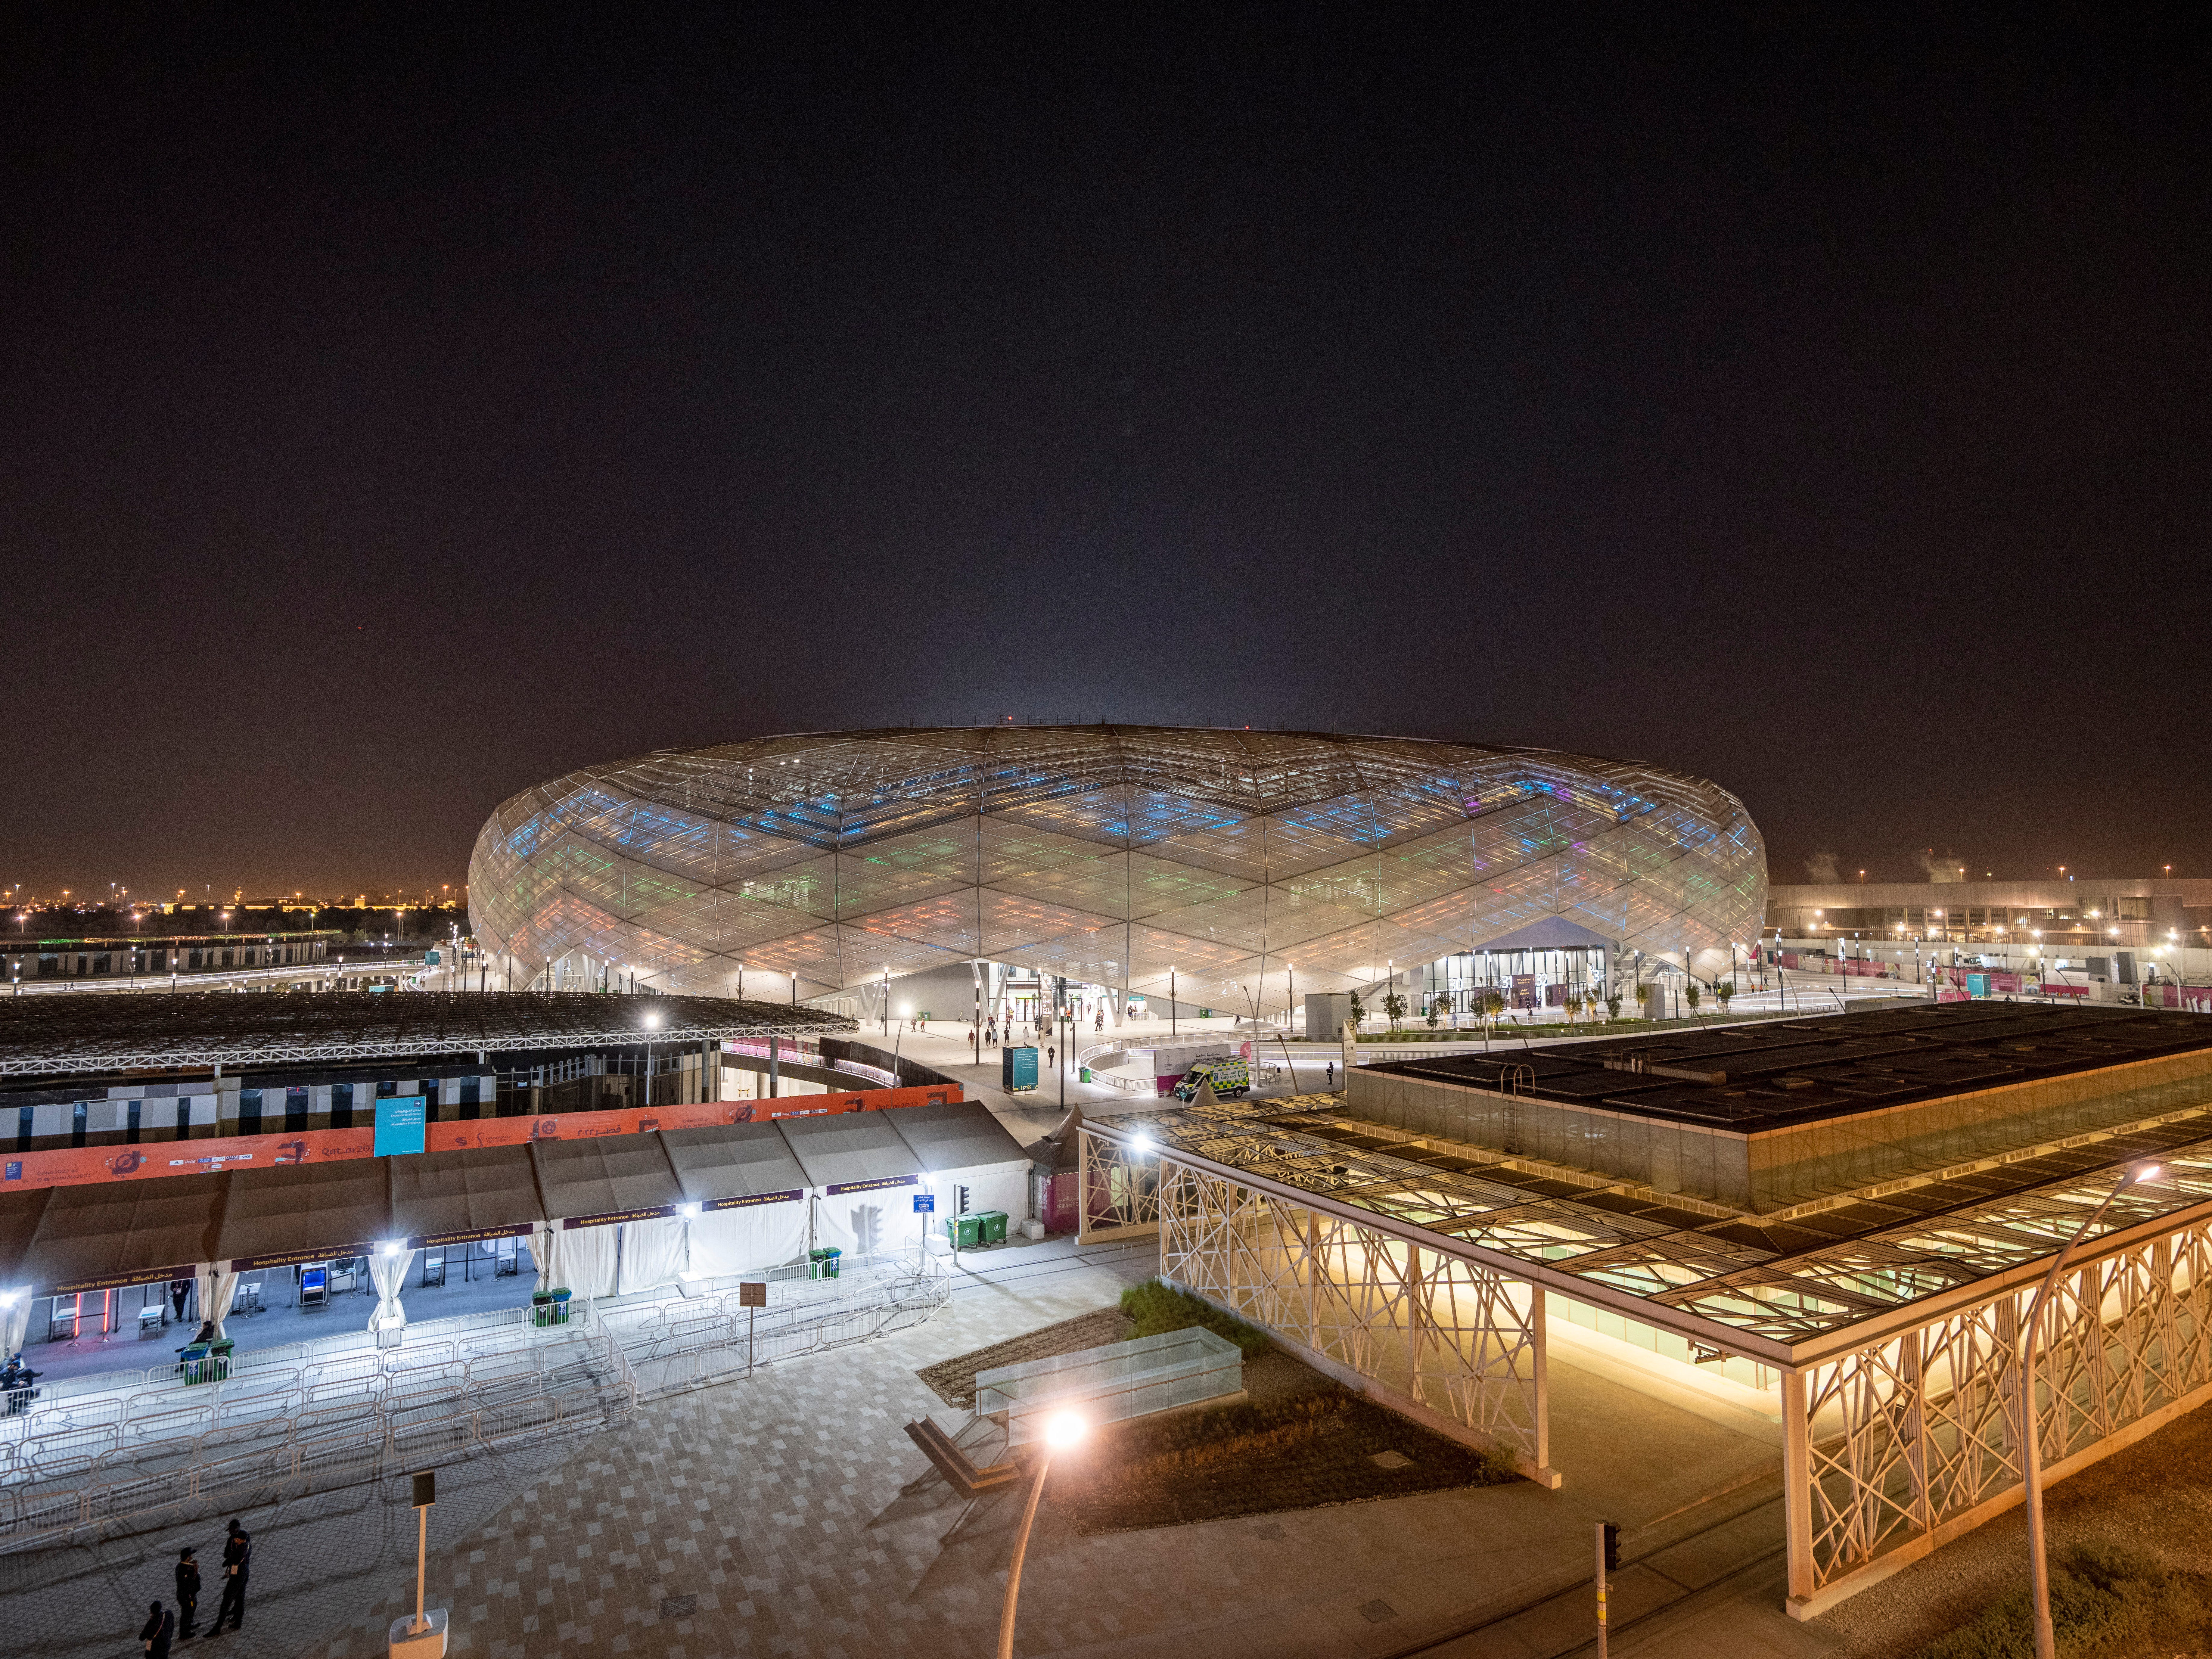 A general view of the Education City Stadium in Doha, Qatar, Tuesday, Dec. 7, 2021. Qatar has built eight stadiums for this World Cup and created an entire new city of Lusail where the final will be held.